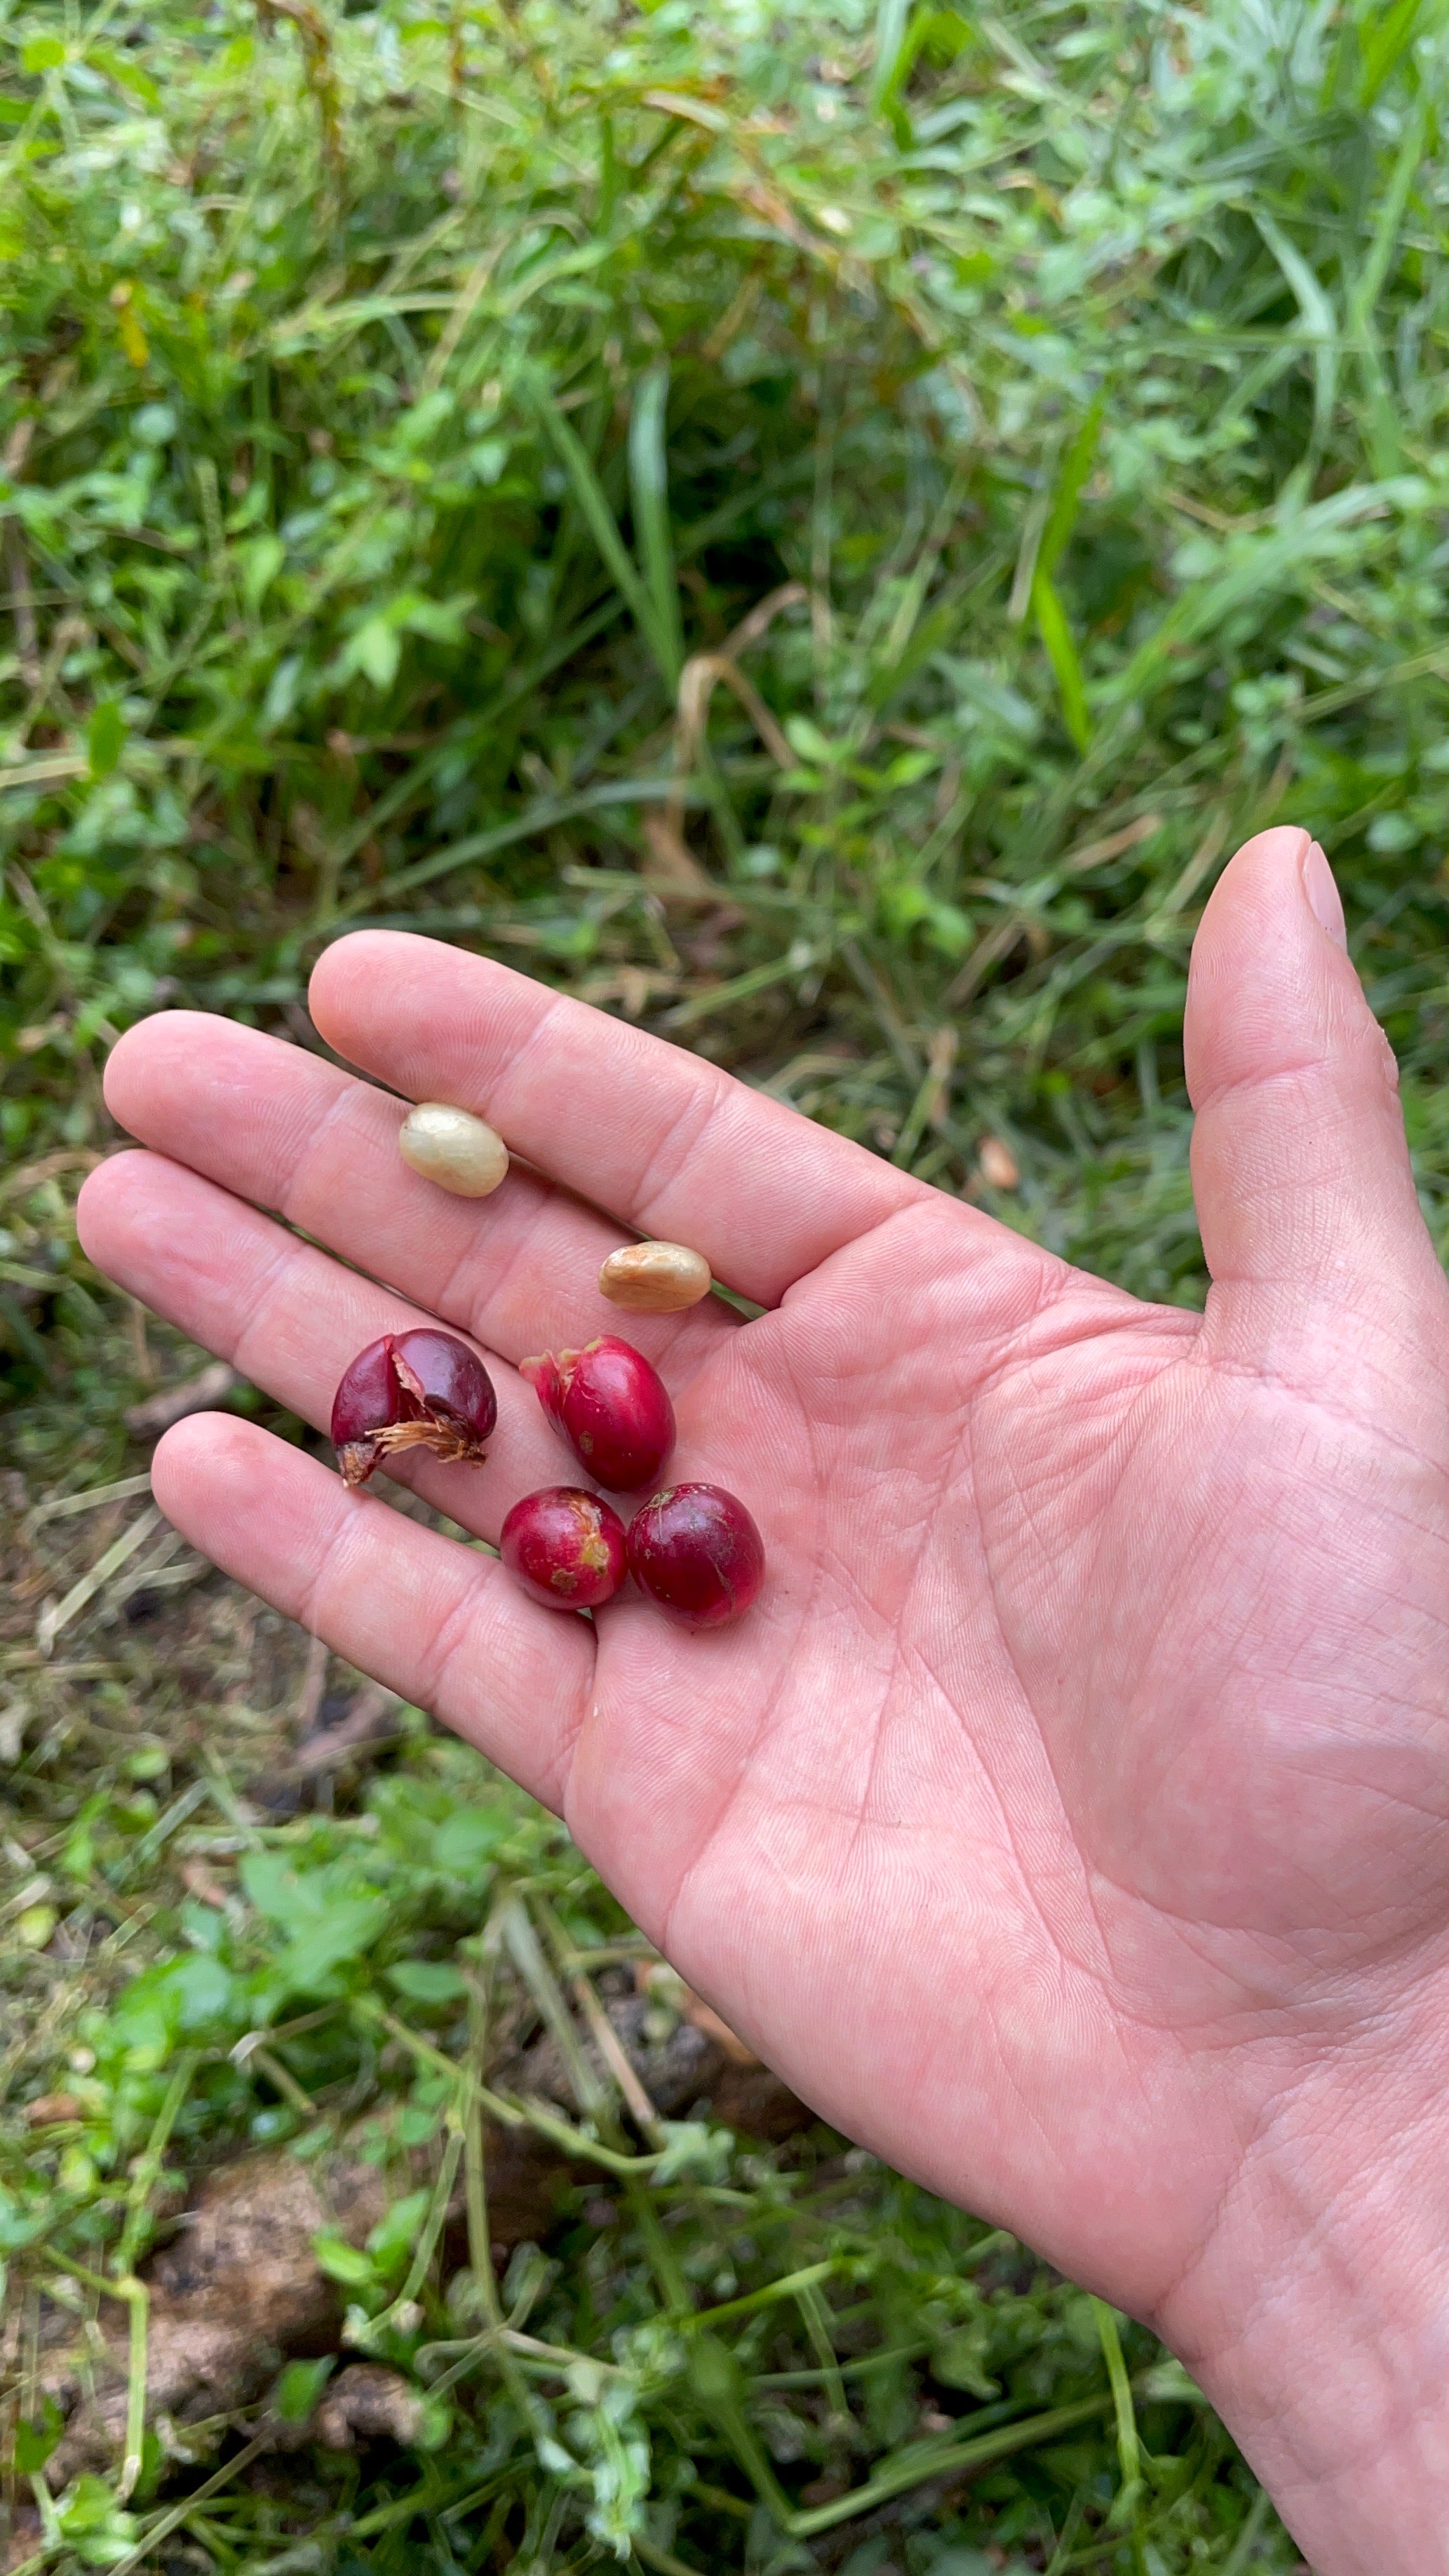 (Walking through the coffee fields, you taste the sweetness of the coffee beans. In Santander, Colombia. Two green coffee beans inside a coffee cherry).